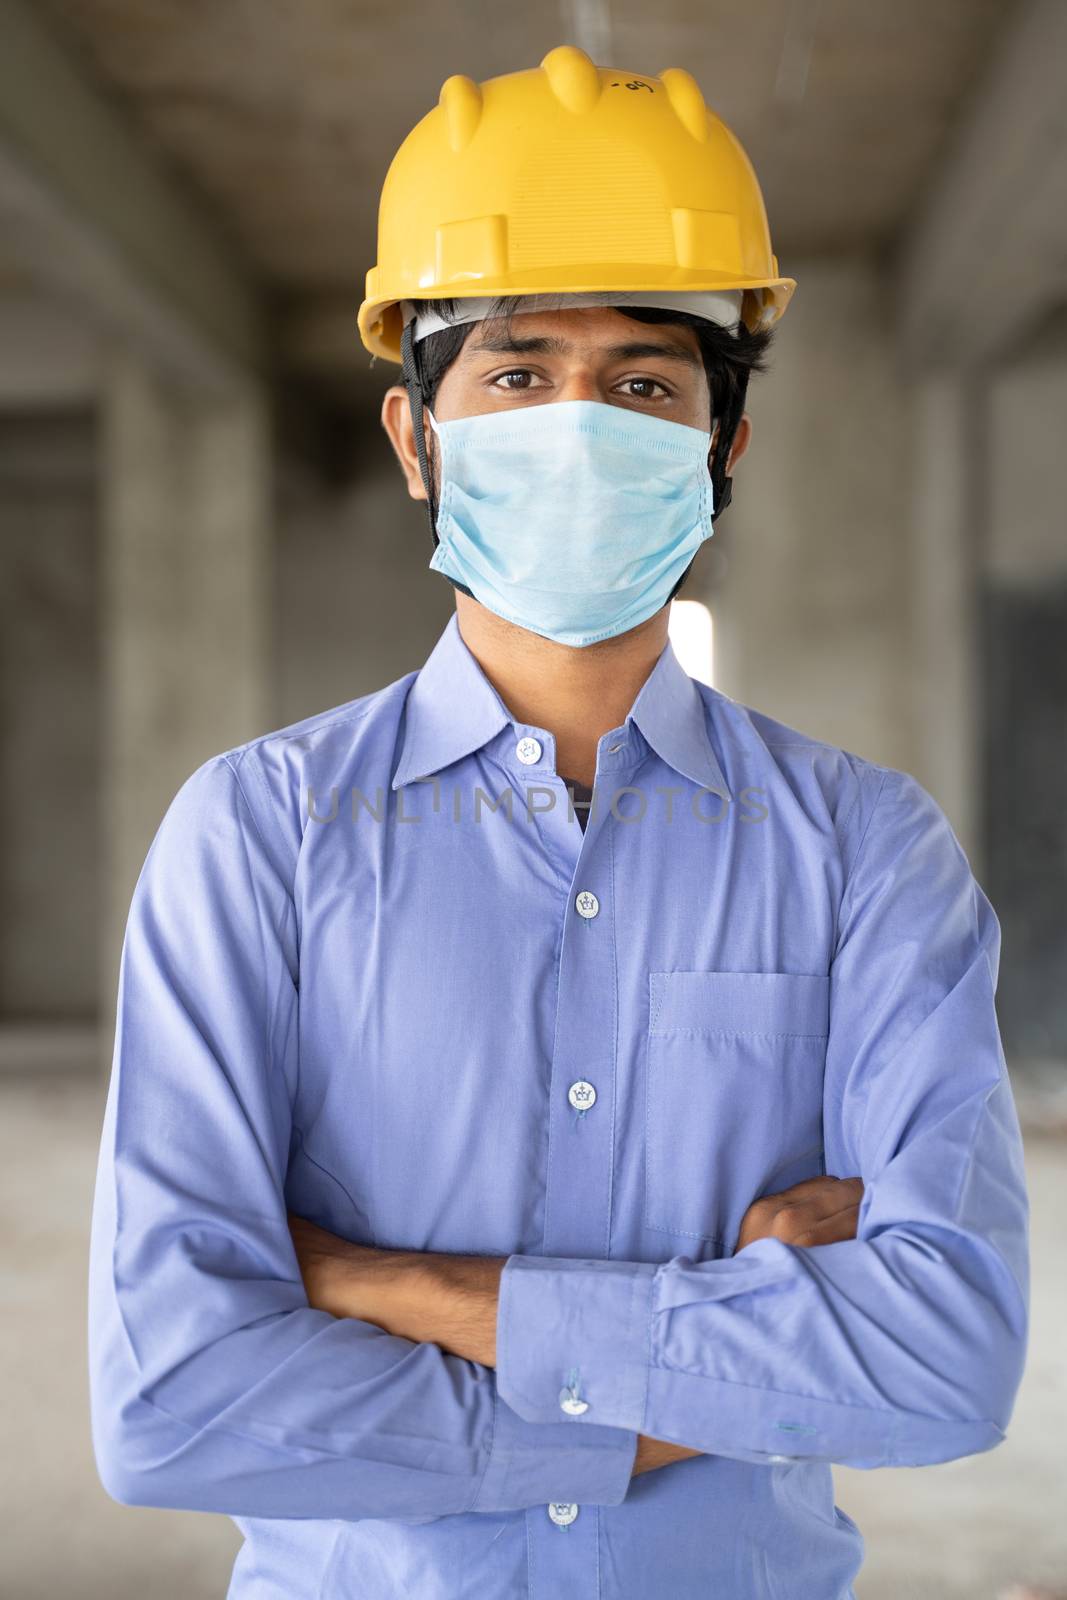 Concept of back to work, opening of construction sites - portrait of confident male construction worker in a construction helmet with medical mask due to coronavirus or covid-19 pandemic